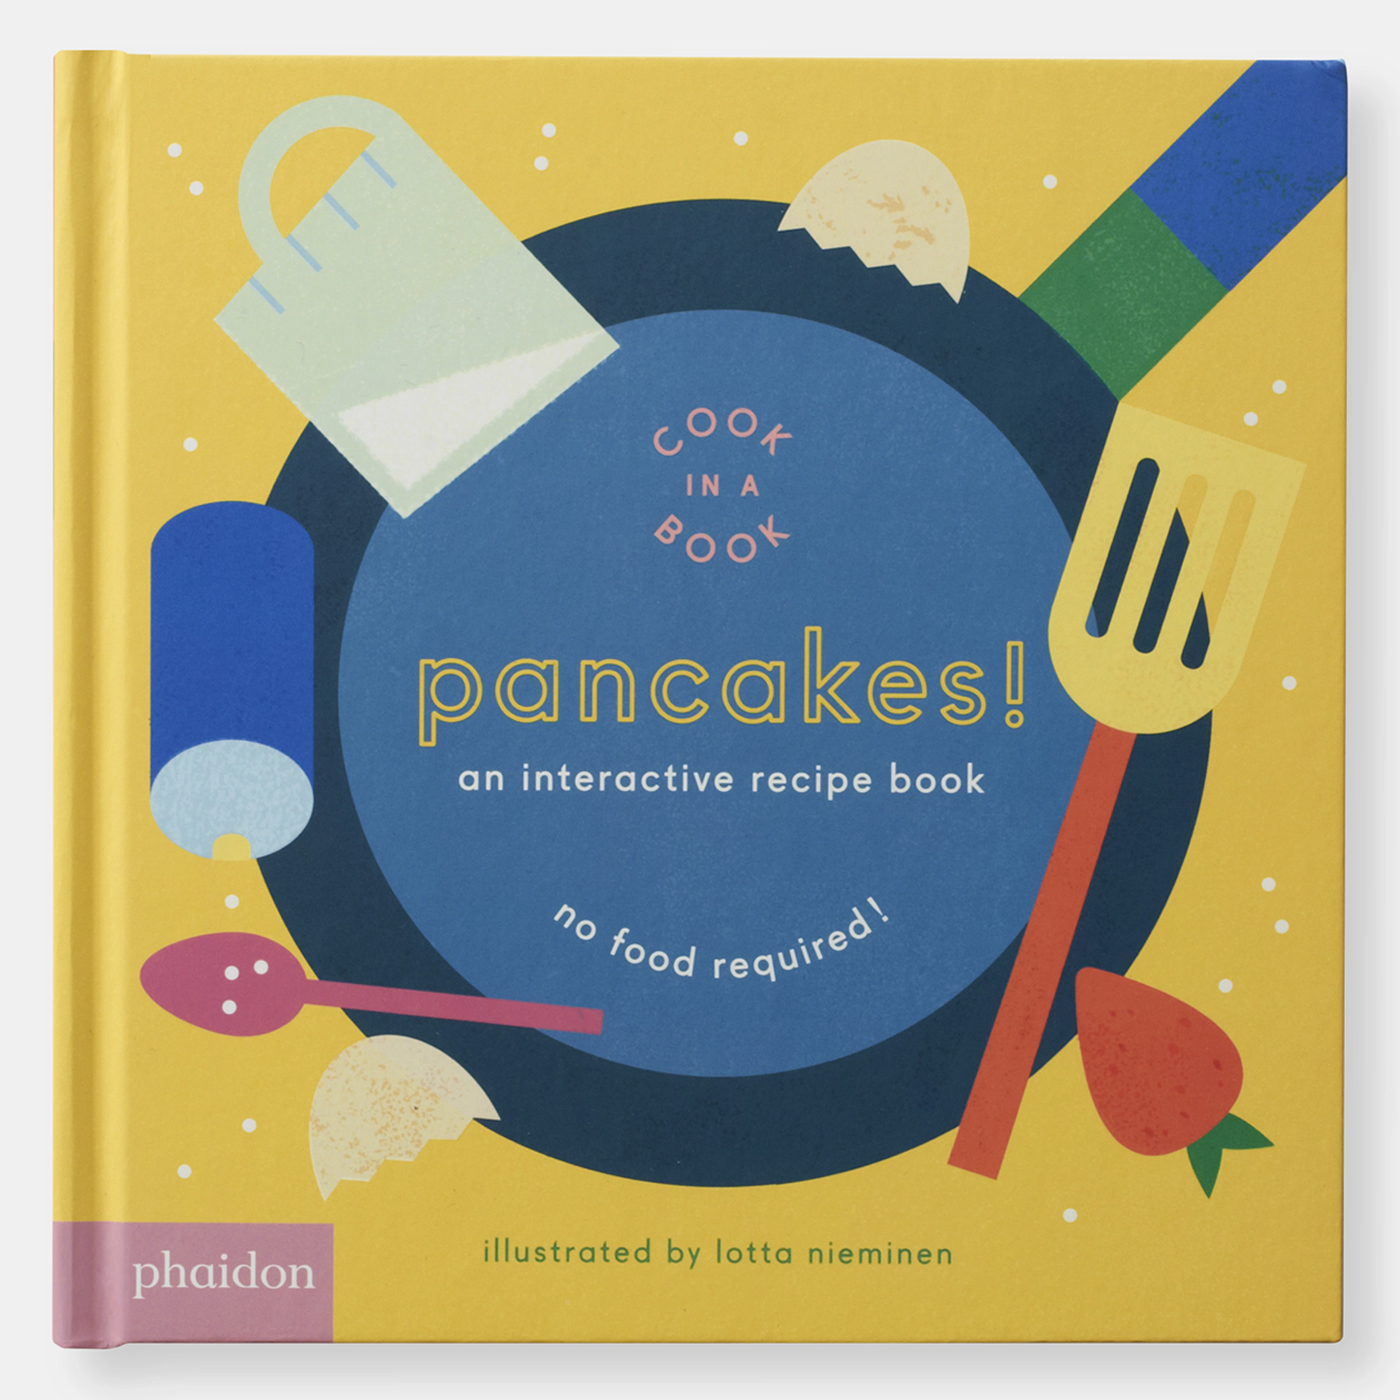  Cook in a Book: Pancakes!